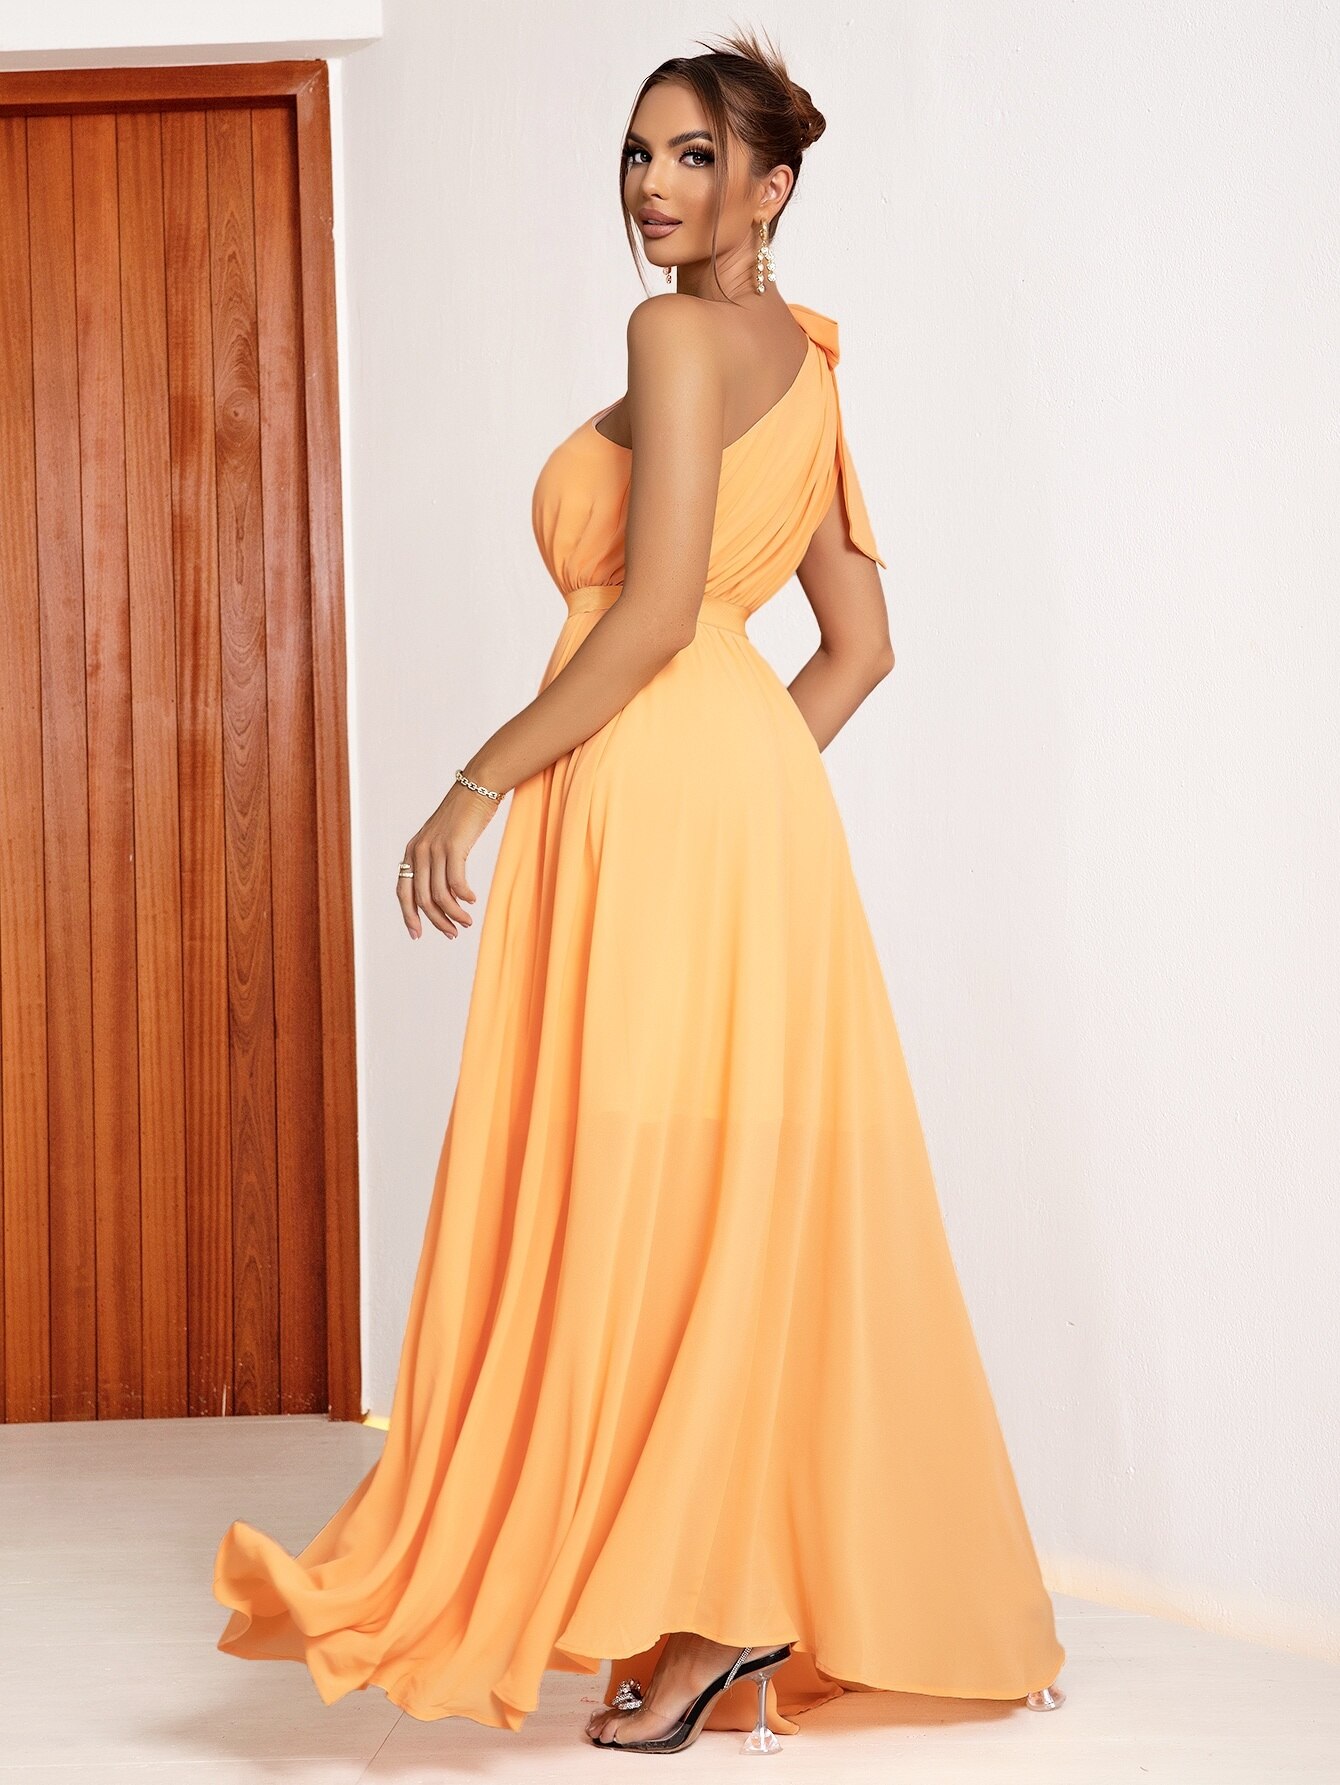 Yissang-Tie-One-Shoulder-Maxi-Dress-1